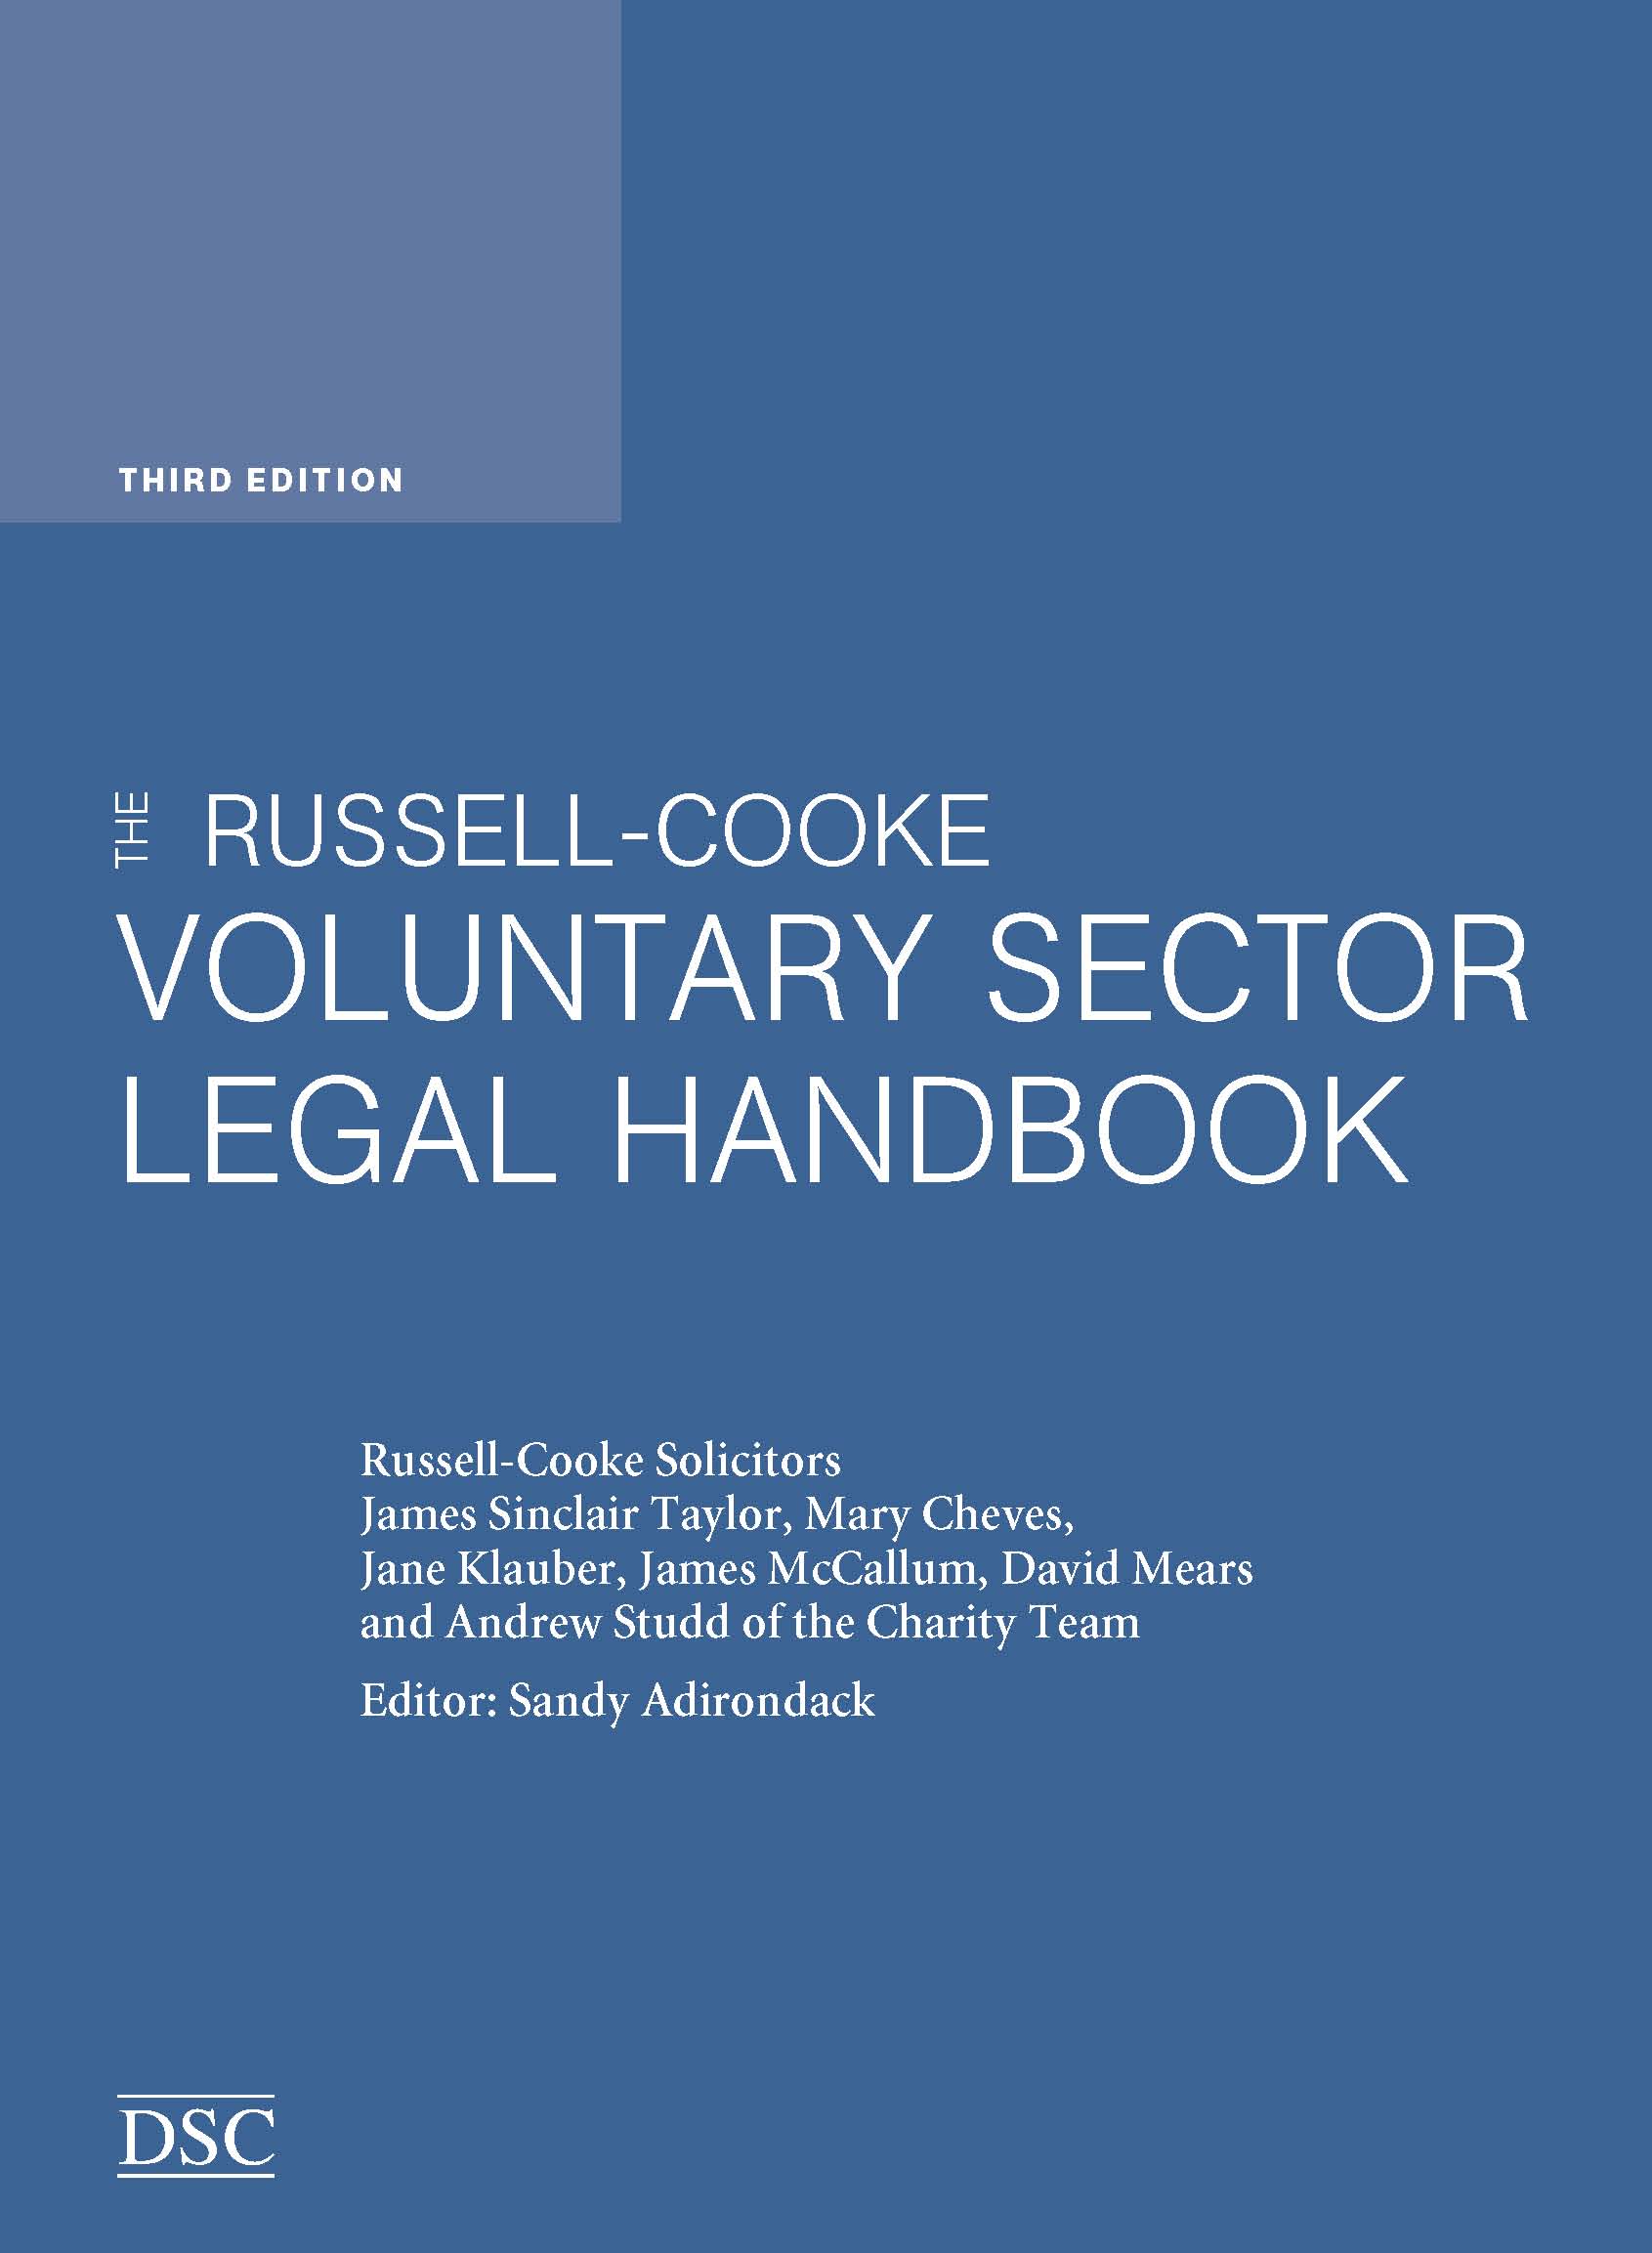 The Russell-Cooke Voluntary Sector Legal Handbook cover